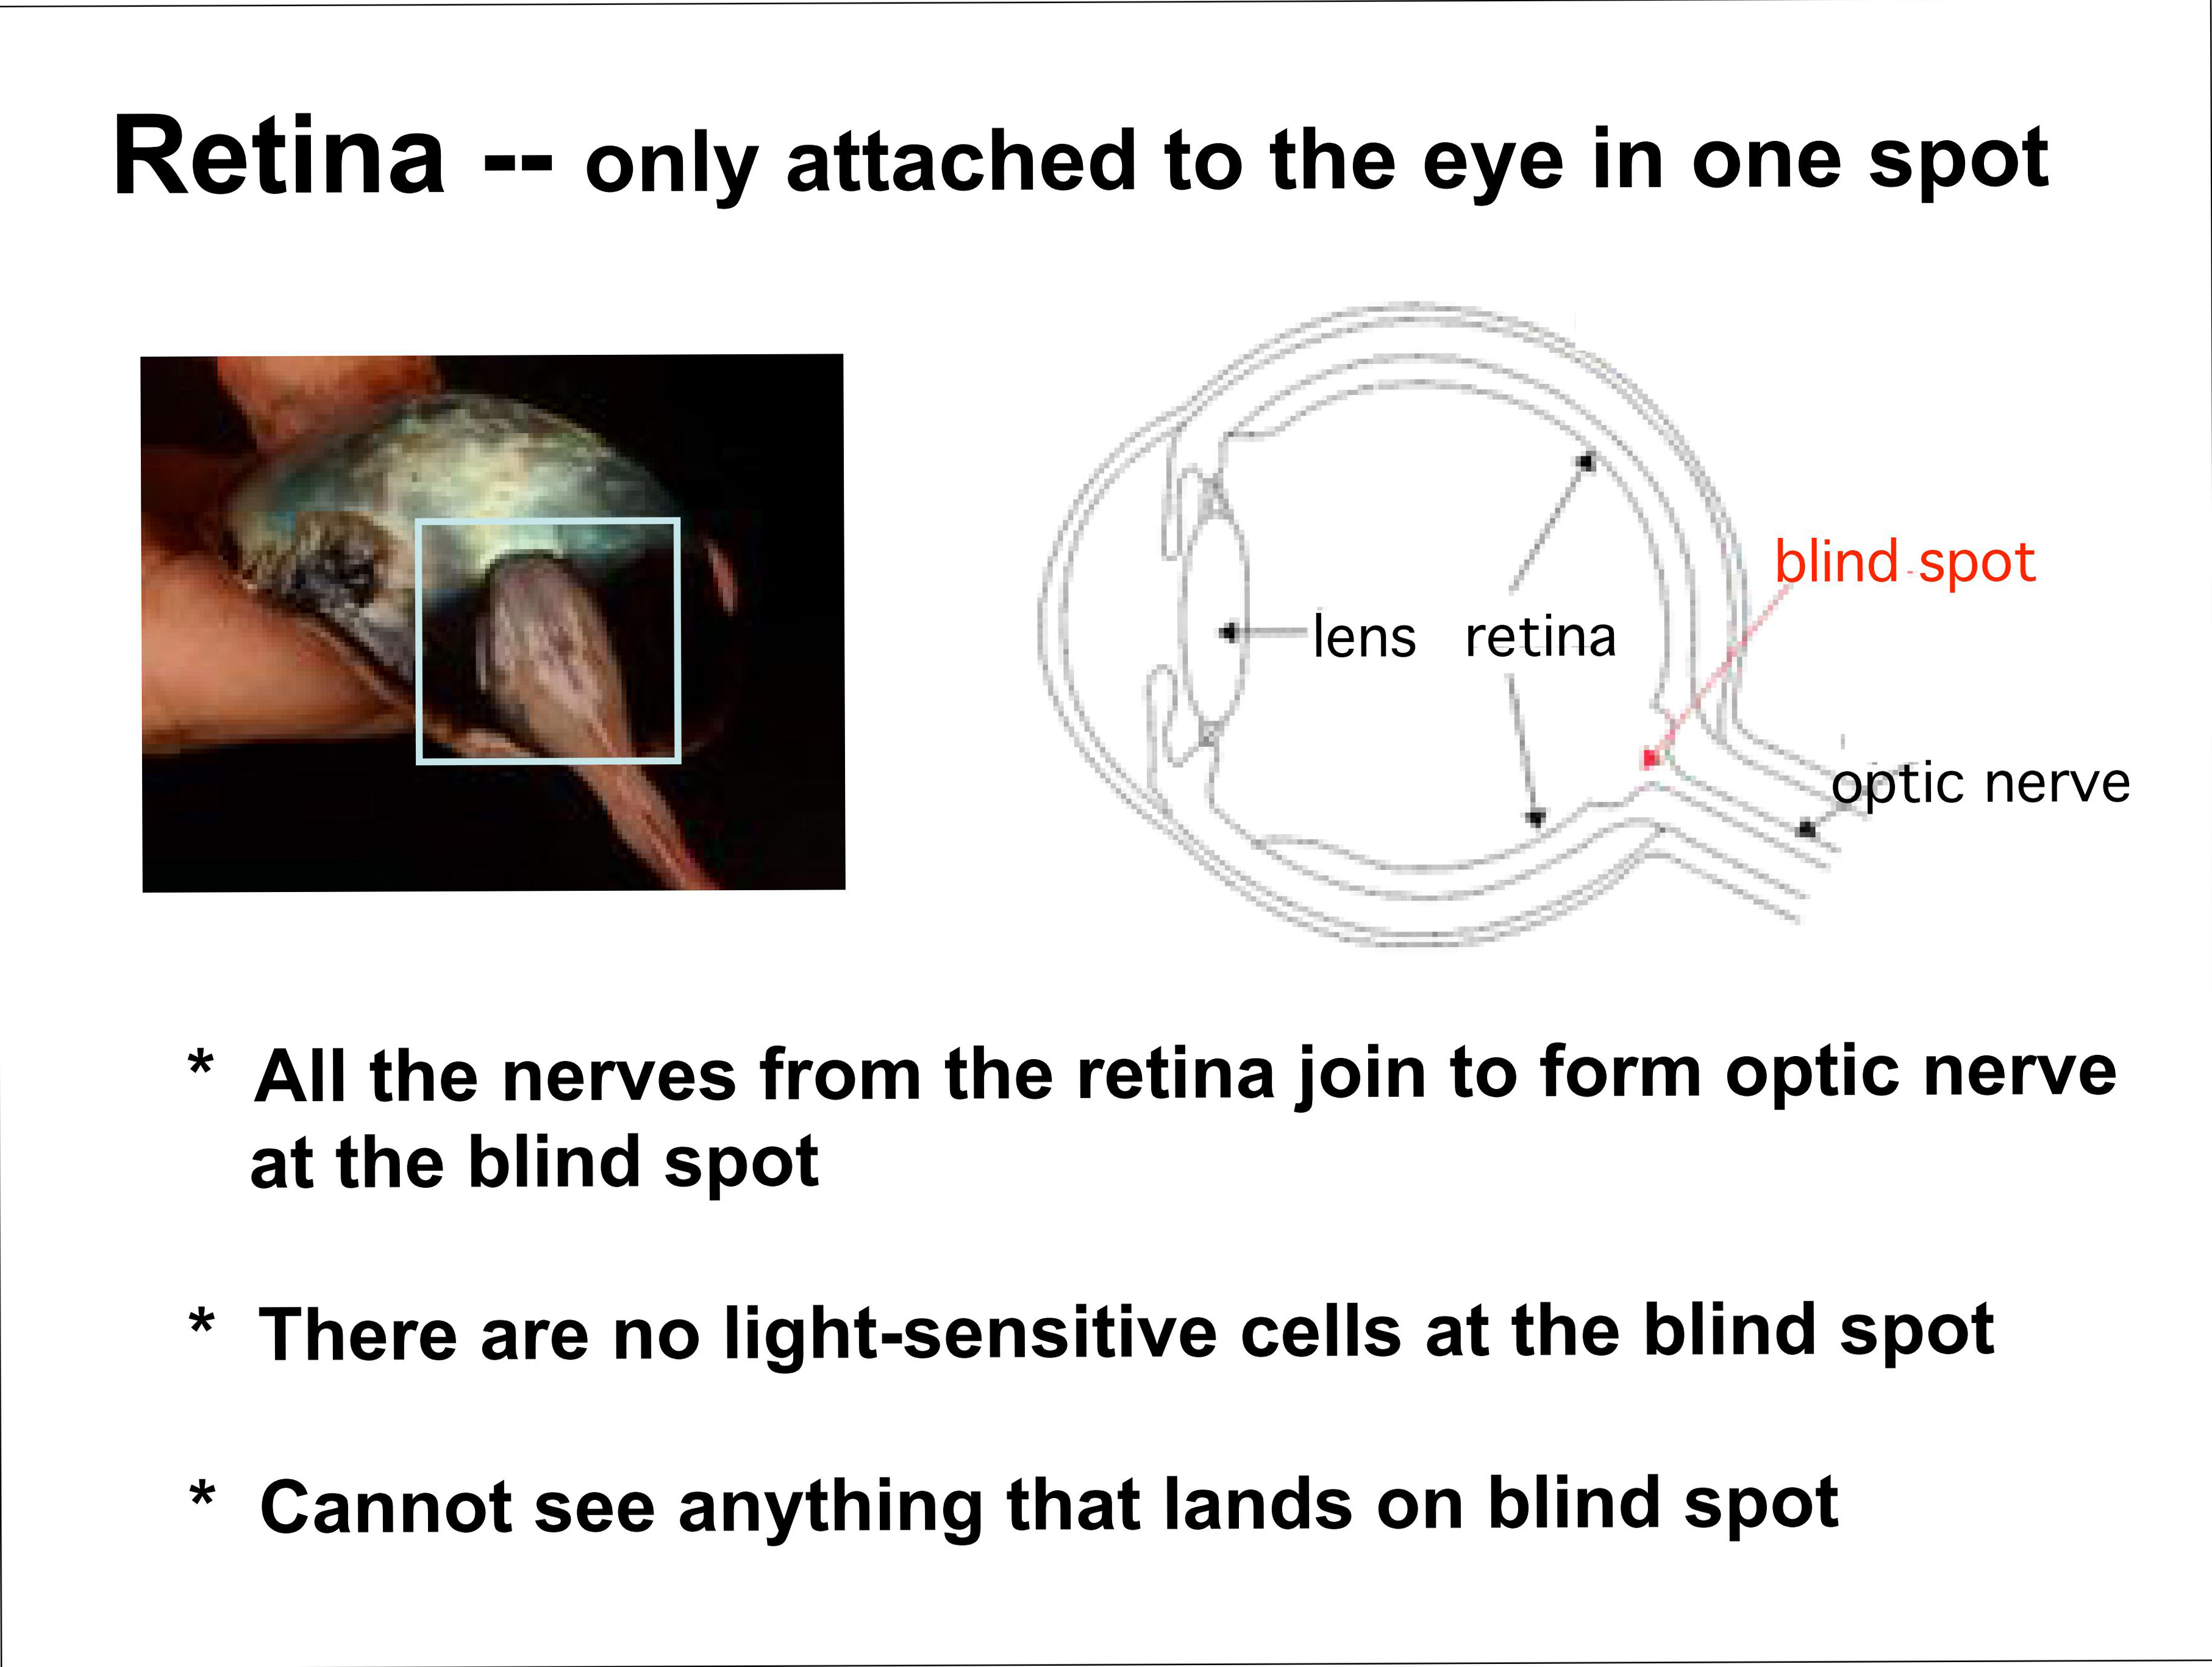 Retina -- only attached to the eye in one spot